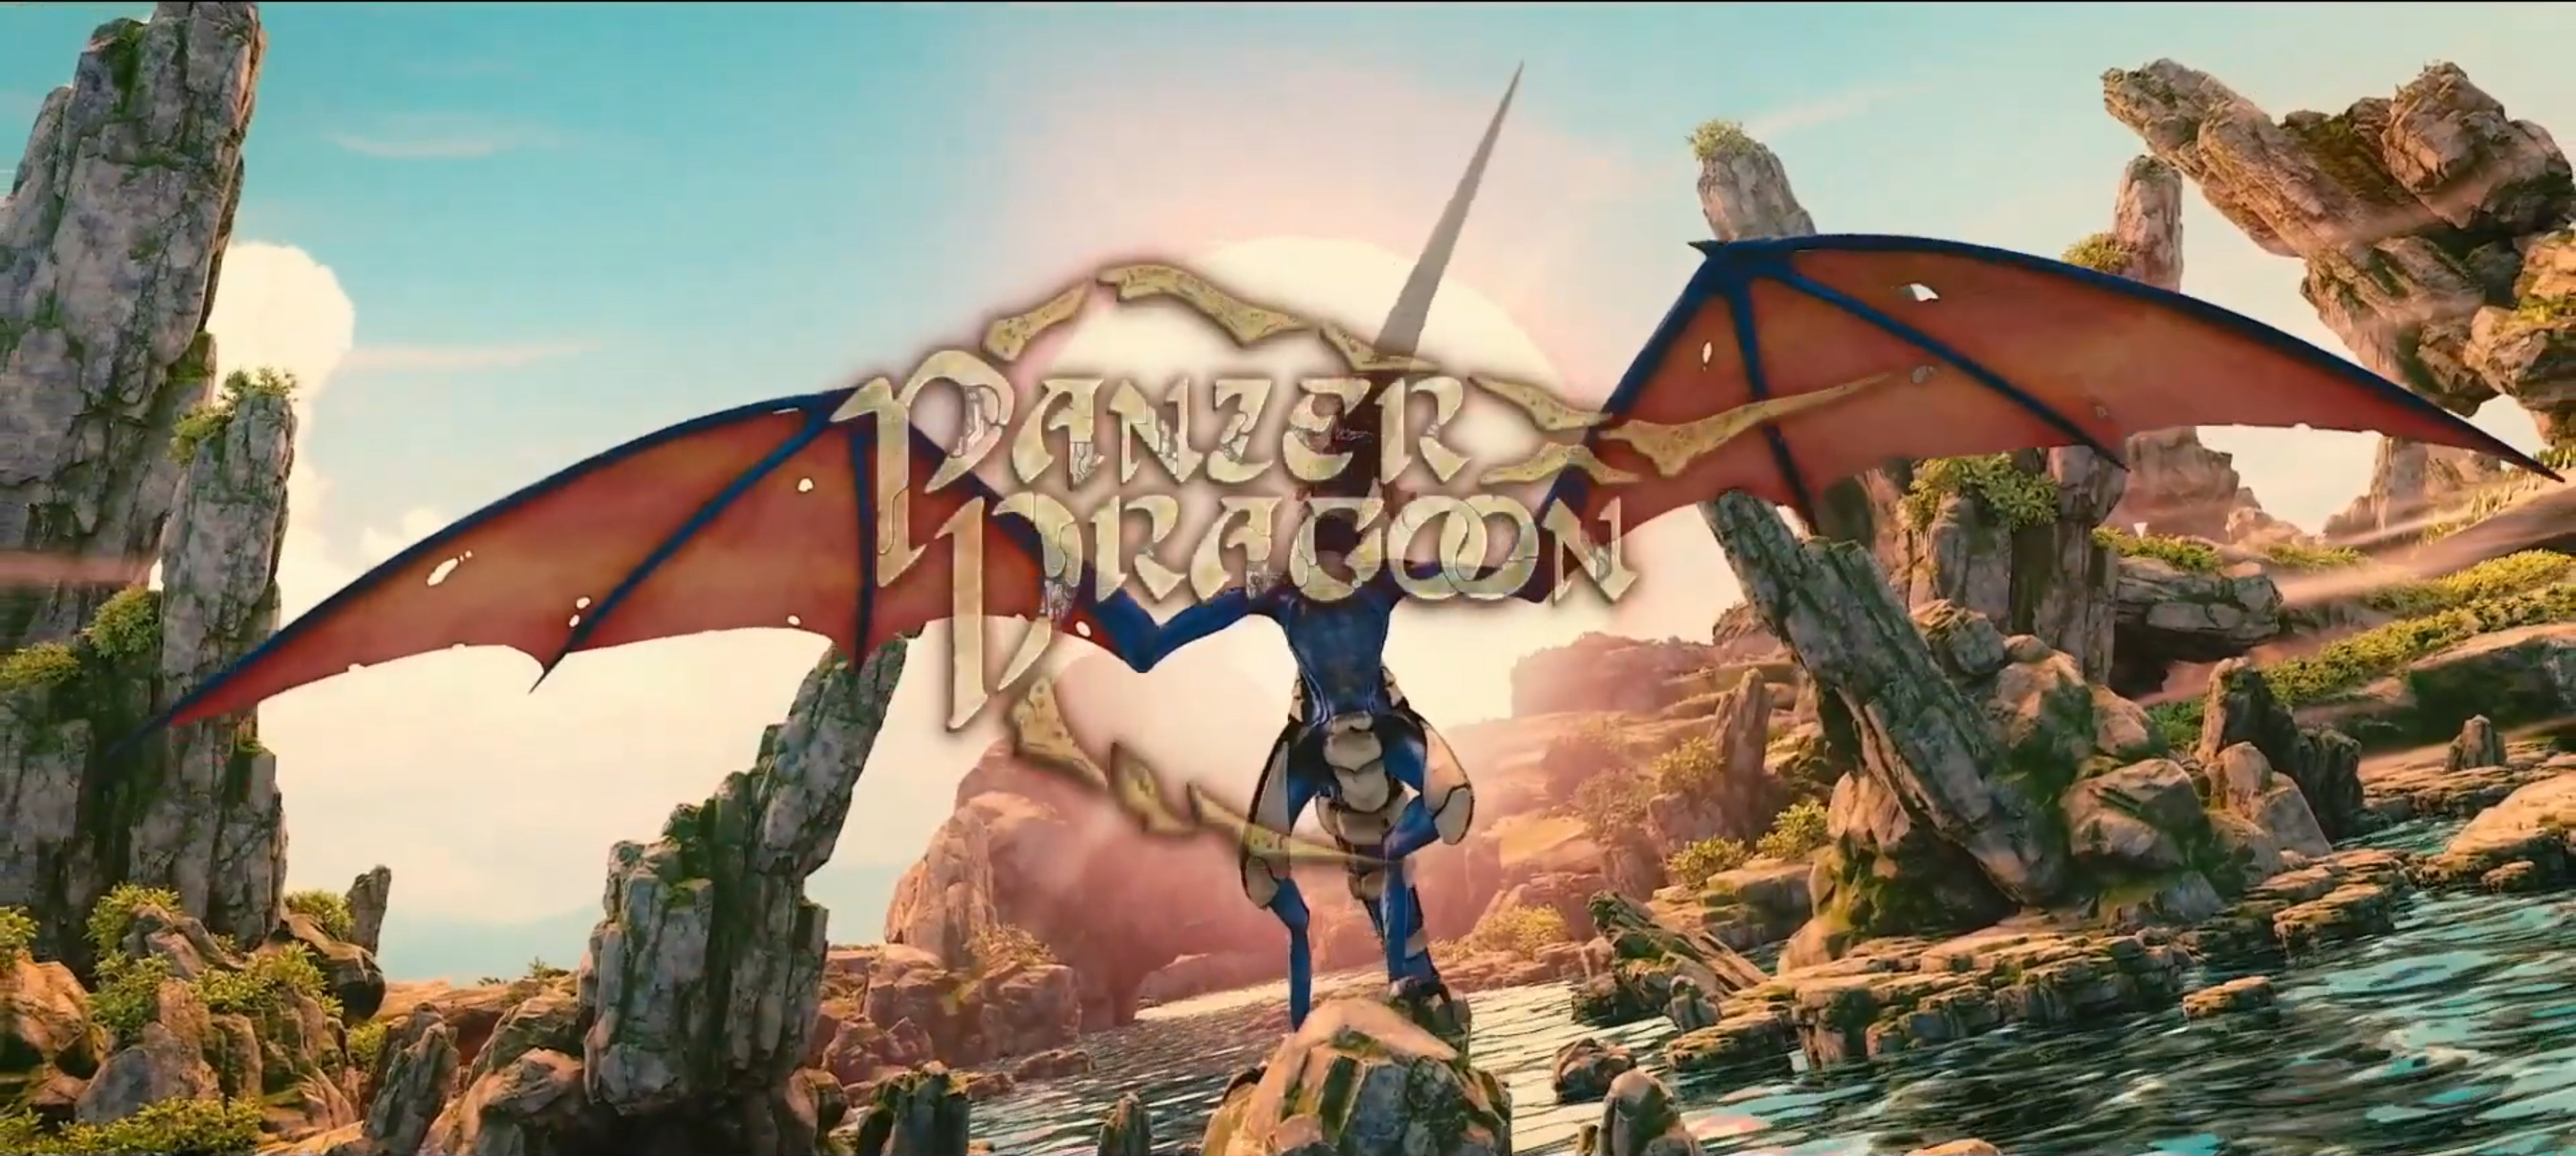 Panzer Dragoon: Remake Official Trailers